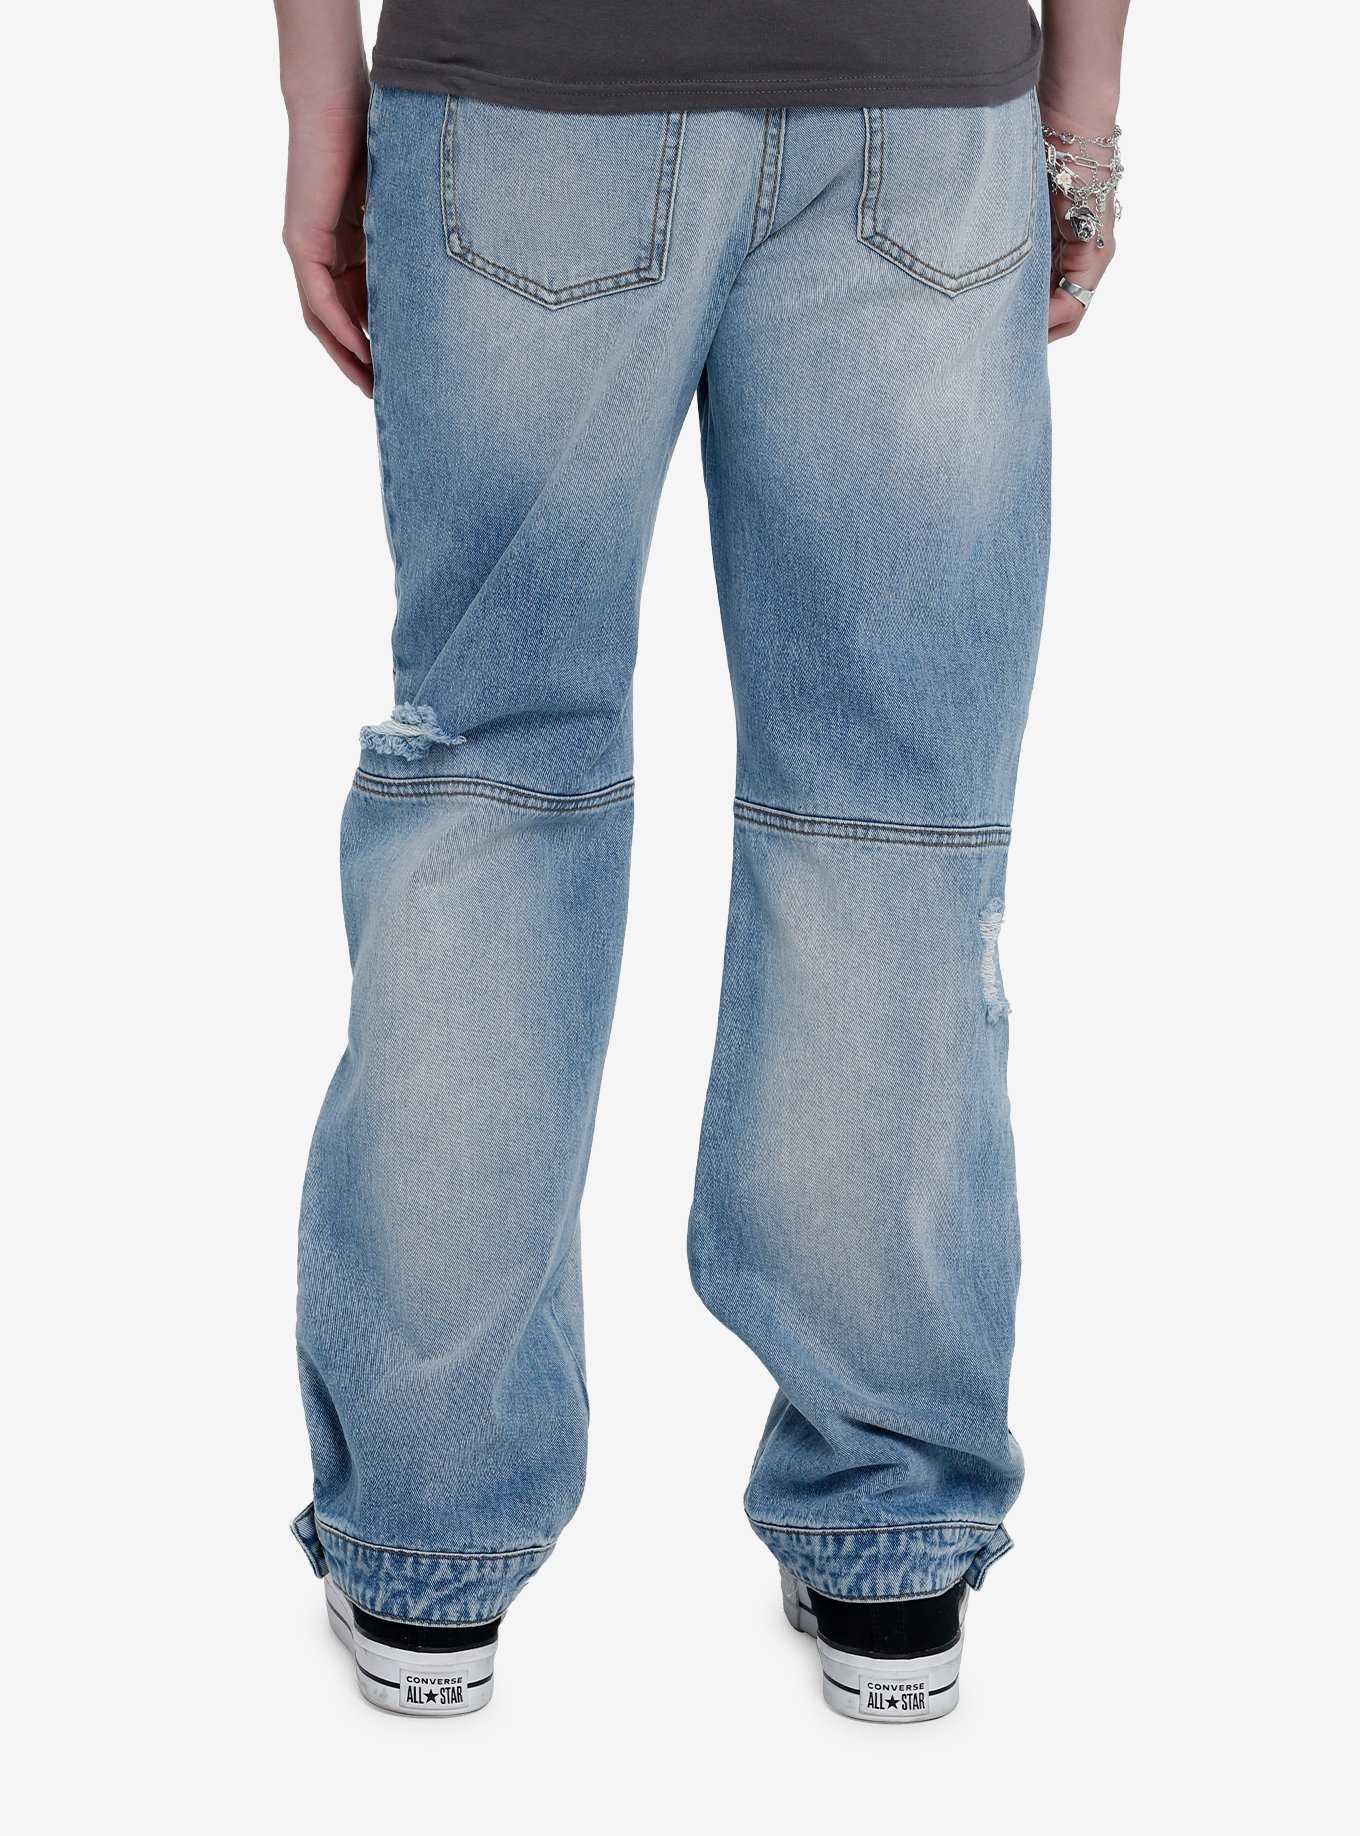 Guys' Jeans & Denim Pants: Ripped, Distressed & Cool Jeans